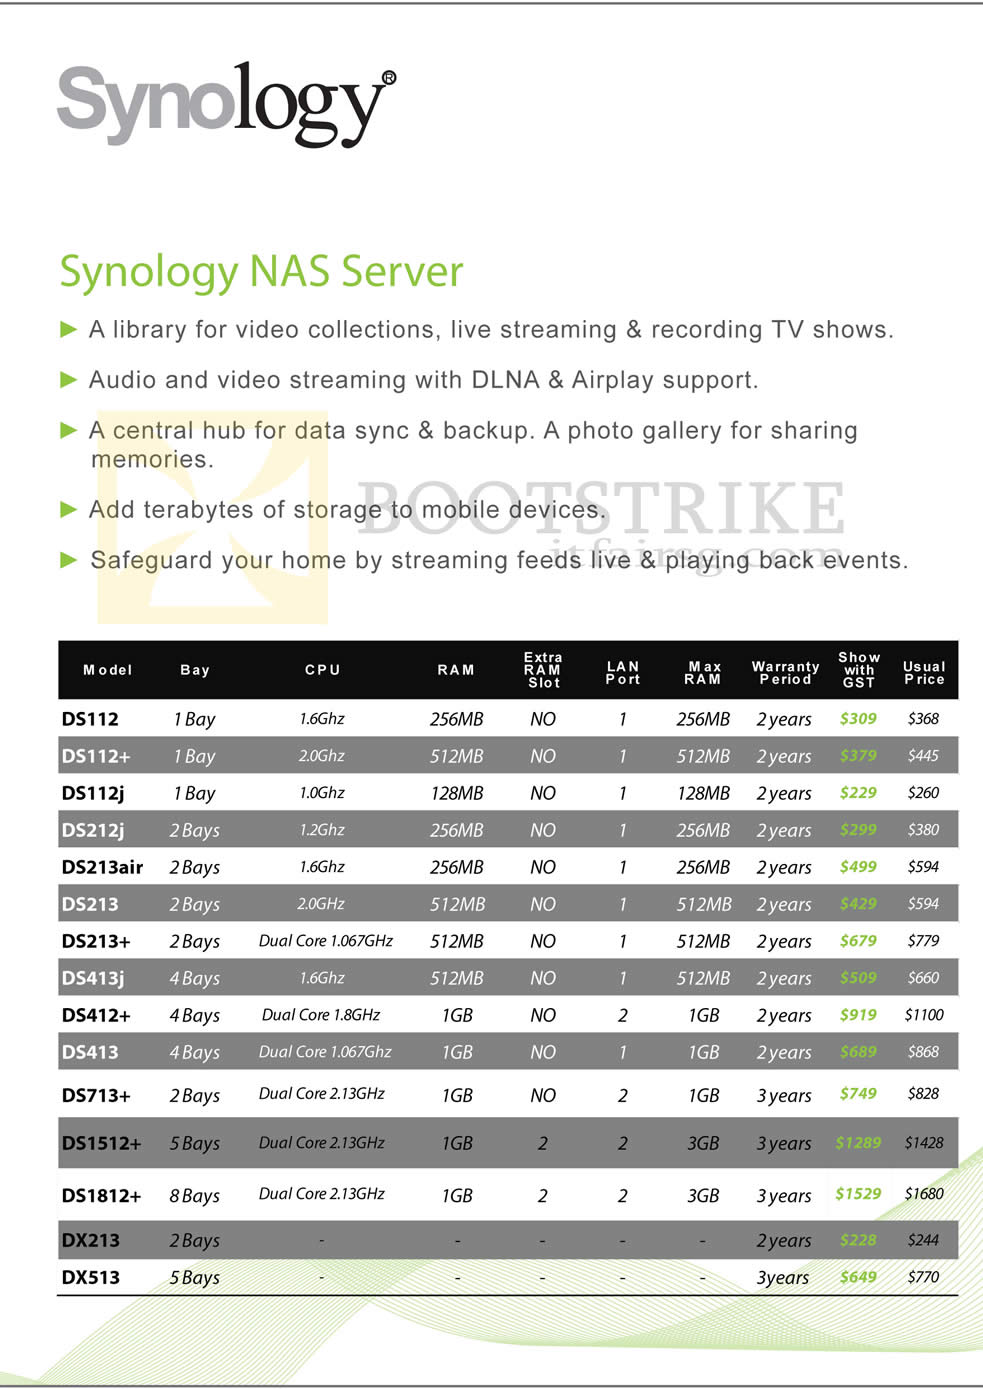 SITEX 2012 price list image brochure of Newstead Synology NAS Server DS112, DS212, DS213, DS412, DS713, DS1512, DS1812, DX213. DX513